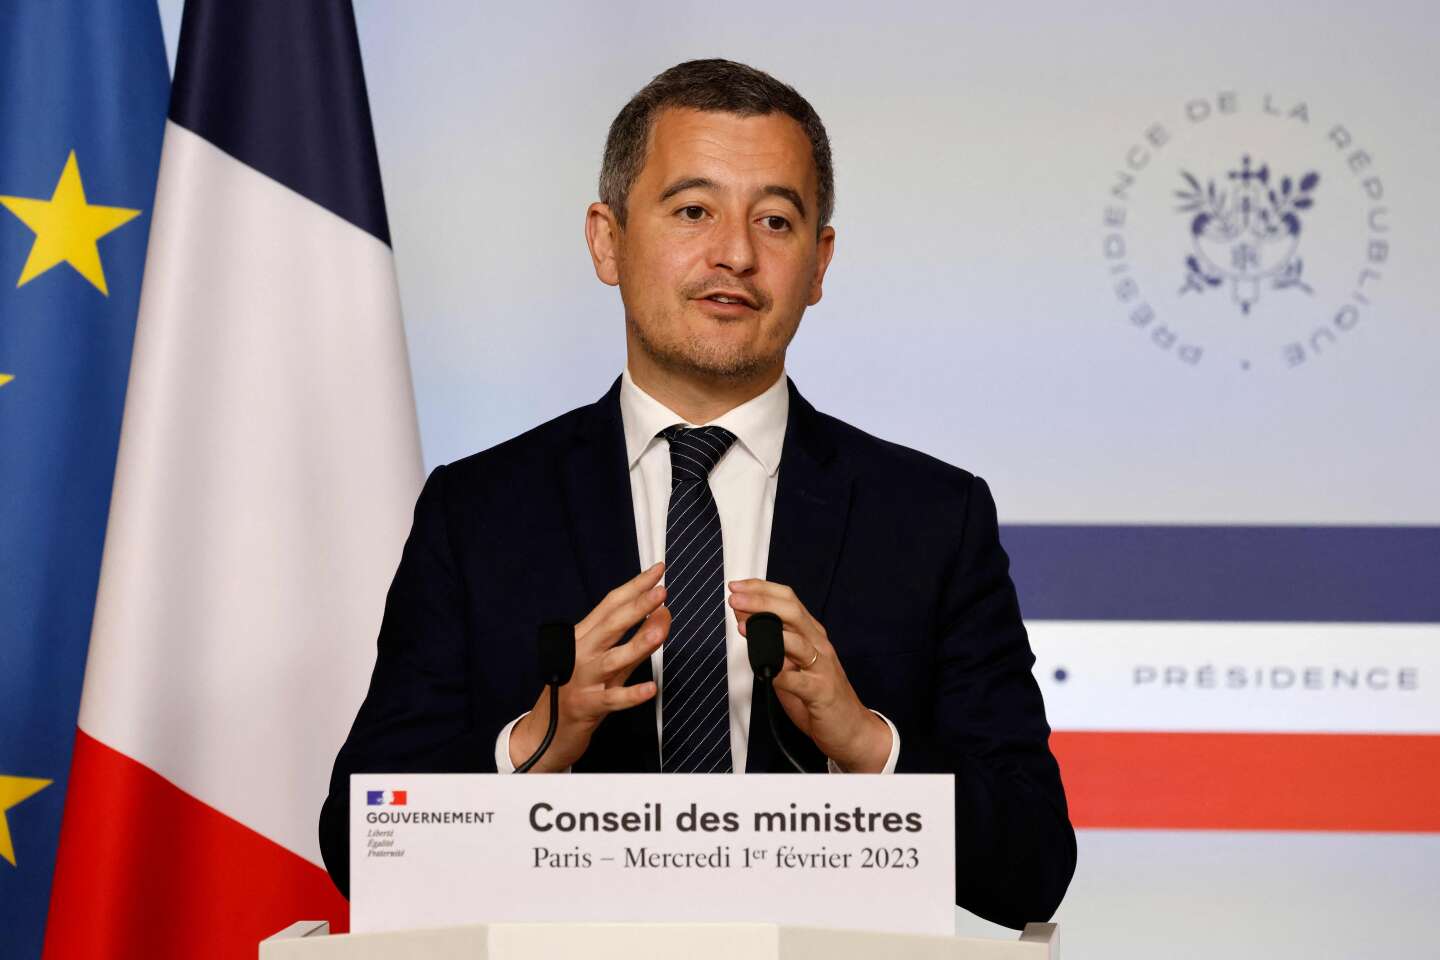 Gérald Darmanin announces the dissolution of two small groups